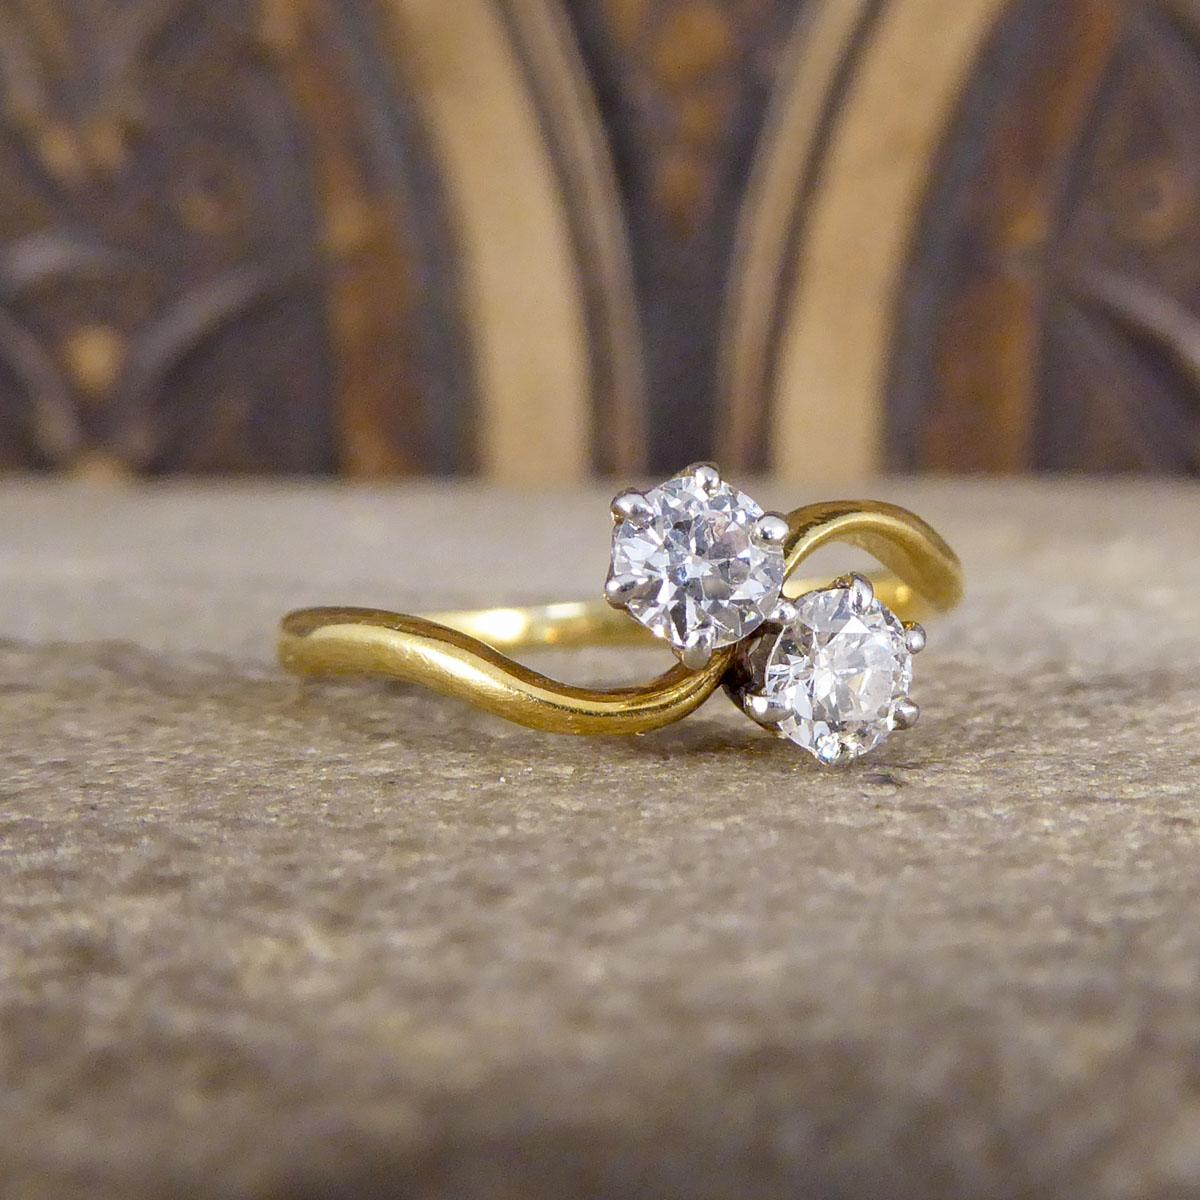 A very elegant two stone diamond twist ring that is set with two sparkling diamonds weighing a total of 0.40ct. The stones are set in 18ct White Gold claw setting on the top leading down to an fine 18ct Yellow Gold band. Such a beautiful antique